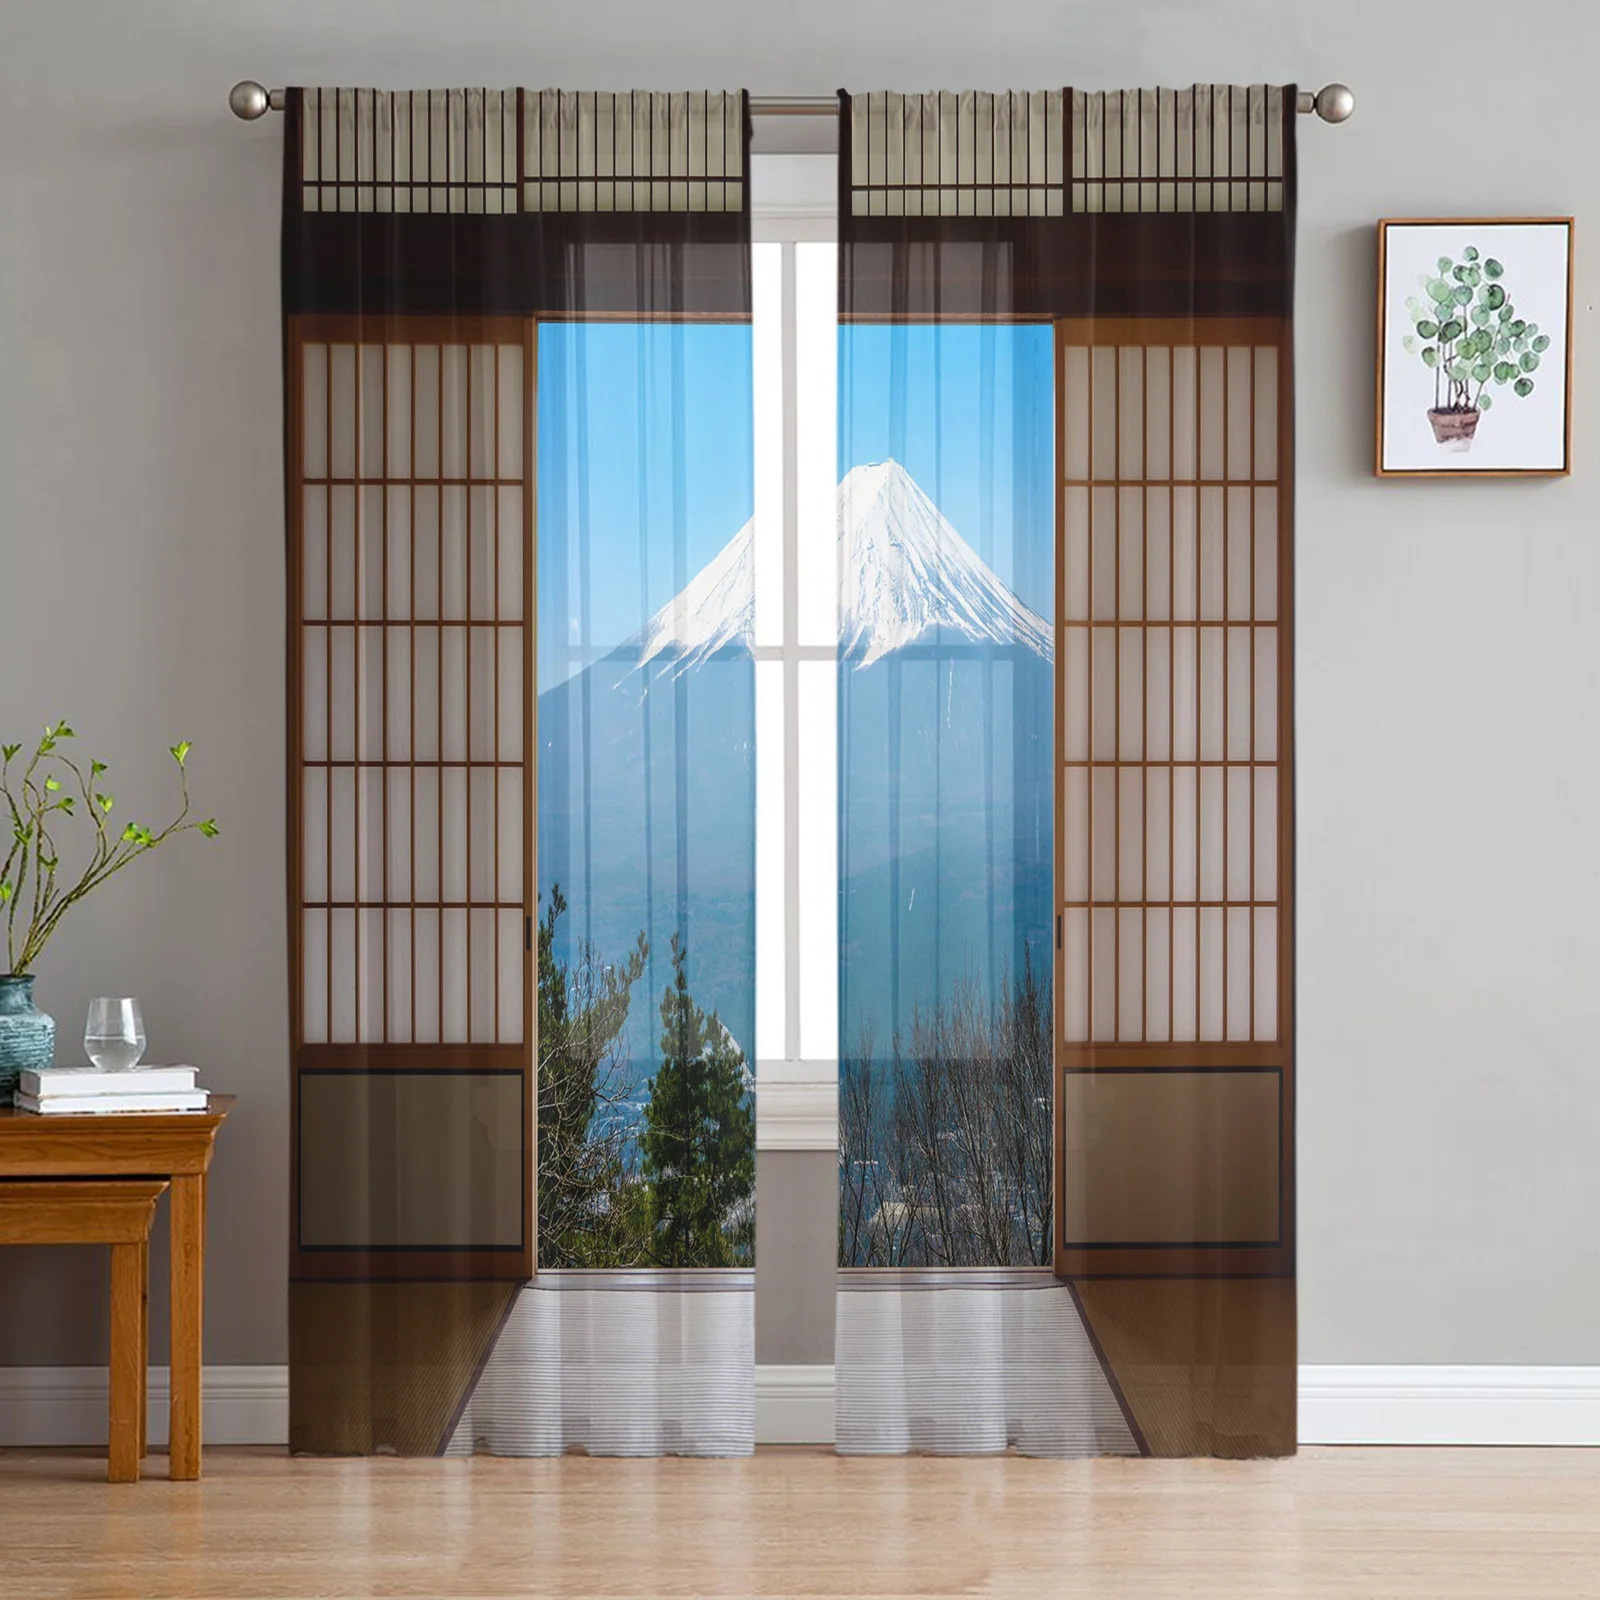 

Mountain Fuji Japan Gate Tulle Curtains for Bedroom Hall Living Room Decor Chiffon Sheer Voile Curtain Balcony Kitchen Drapes